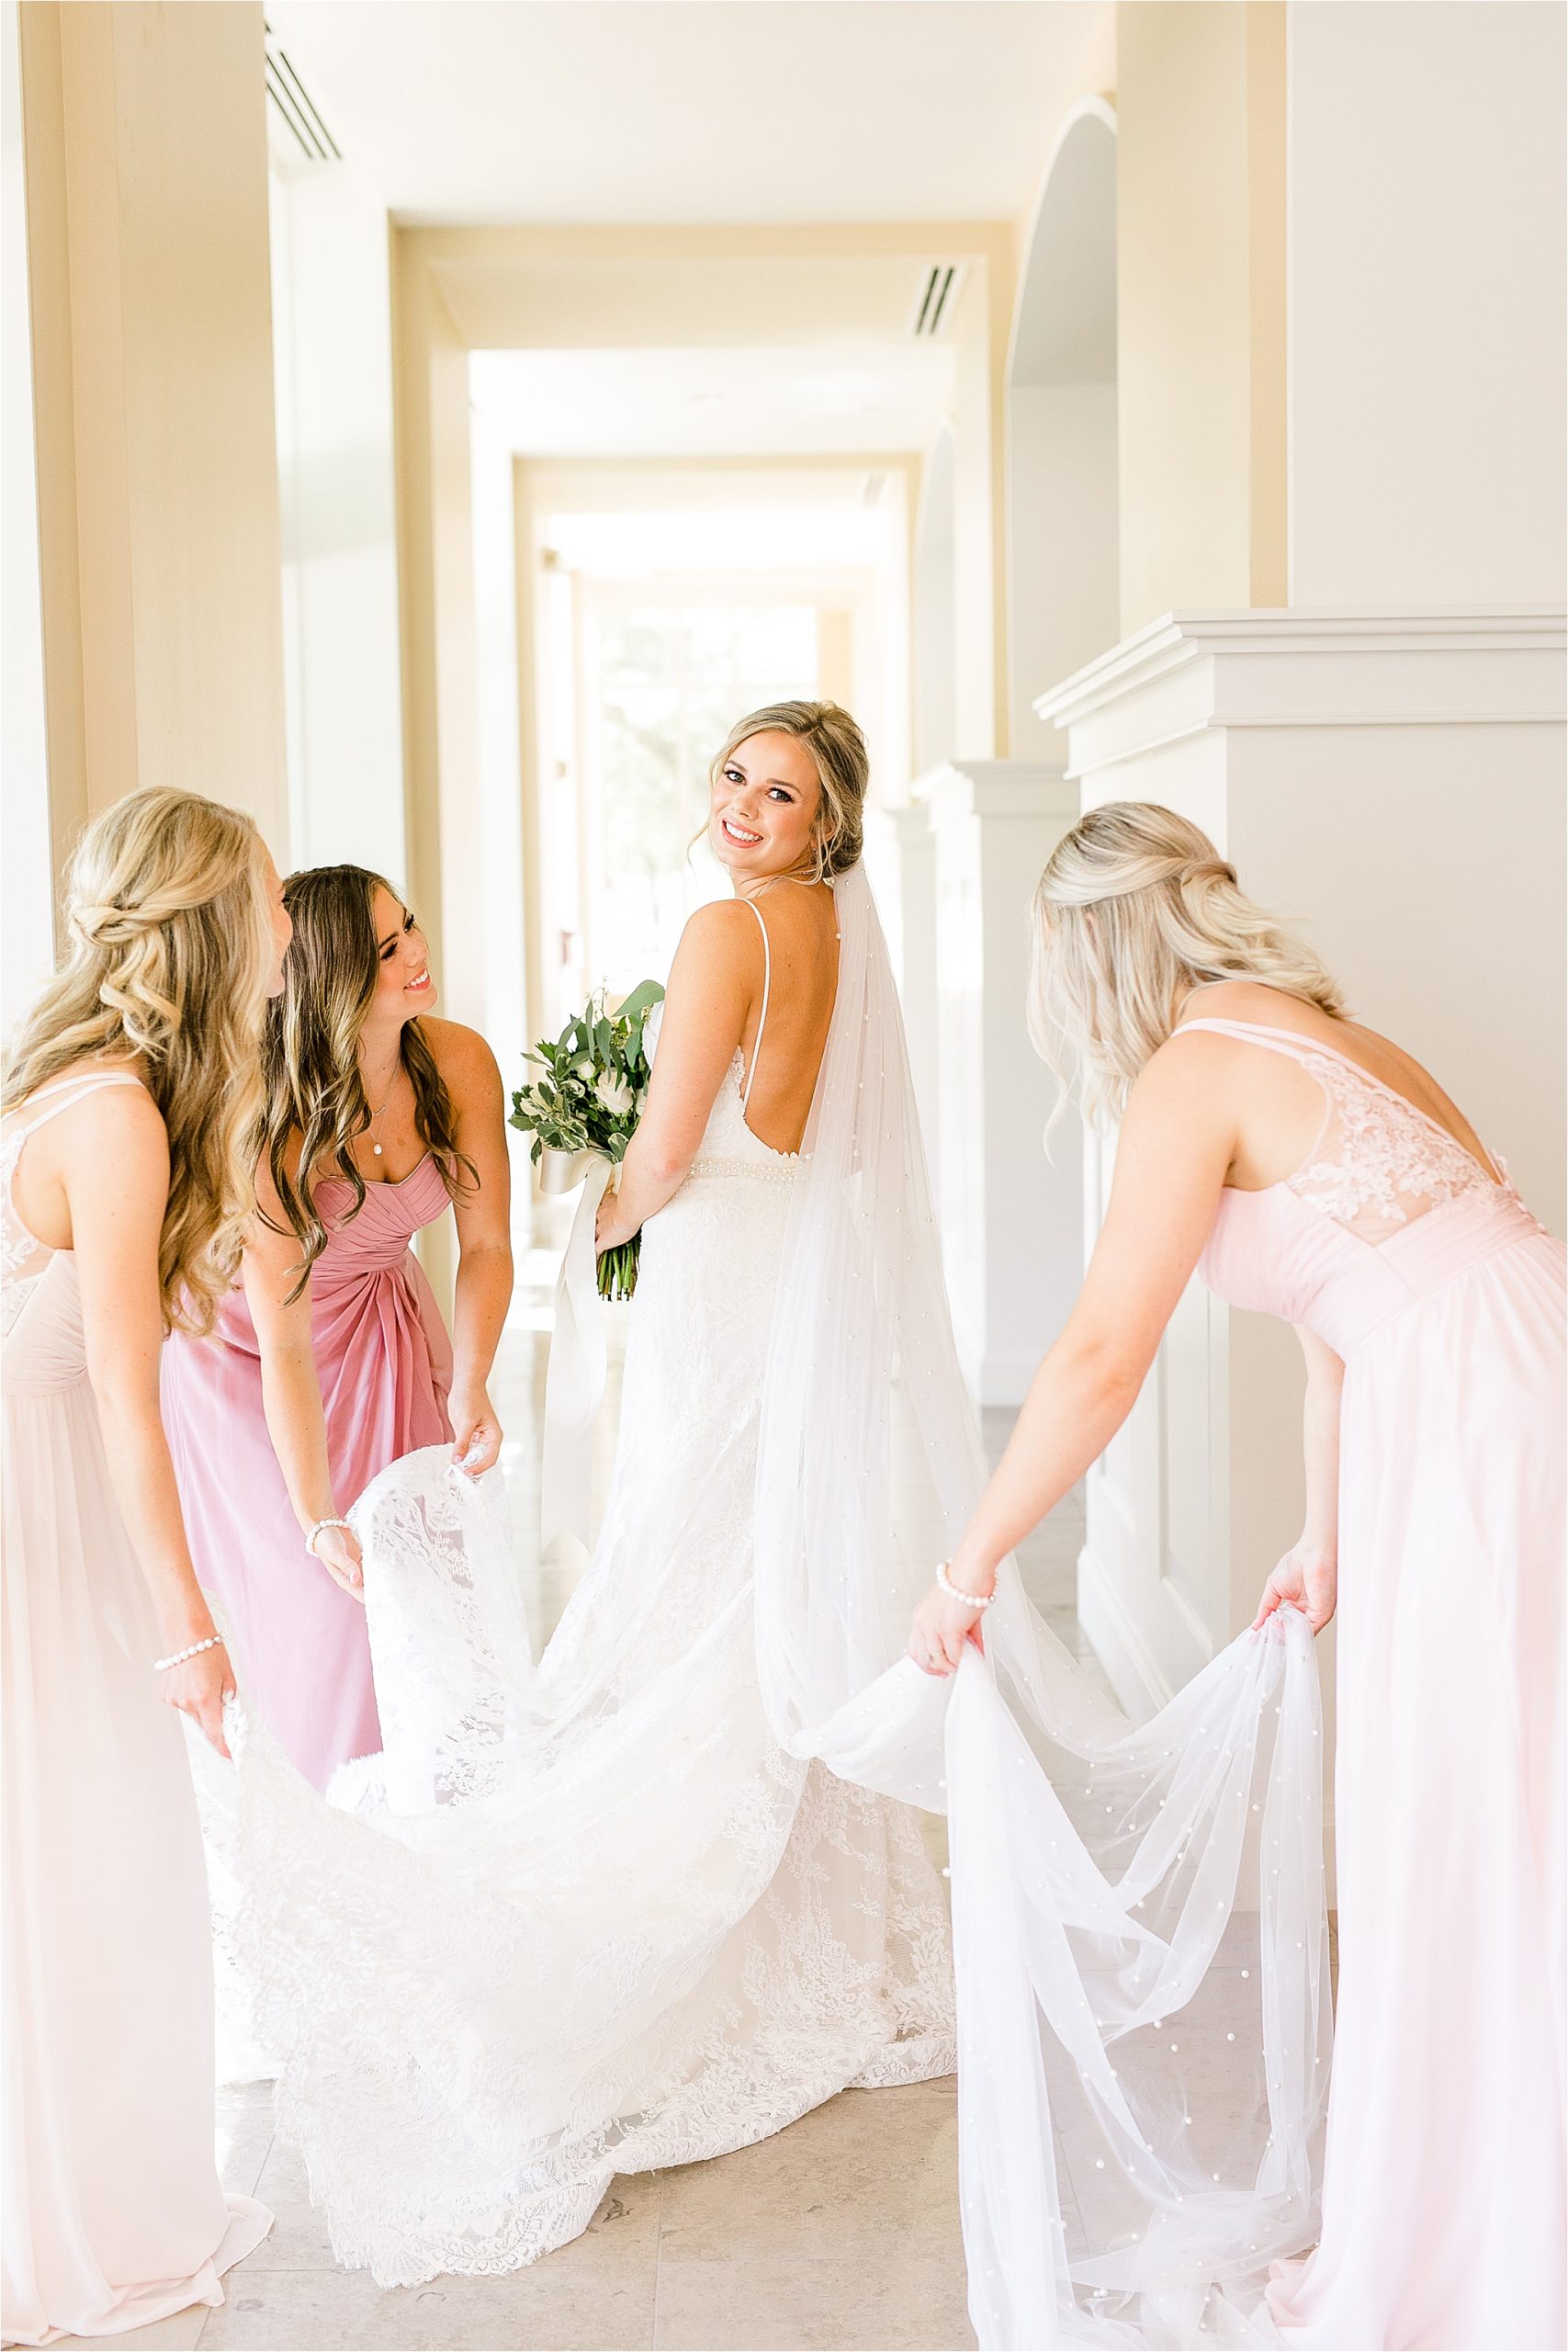 Bridesmaids fix a bride's train at she glances back at the camera on her wedding day at Prestonwood Chapel in Plano, Texas. 